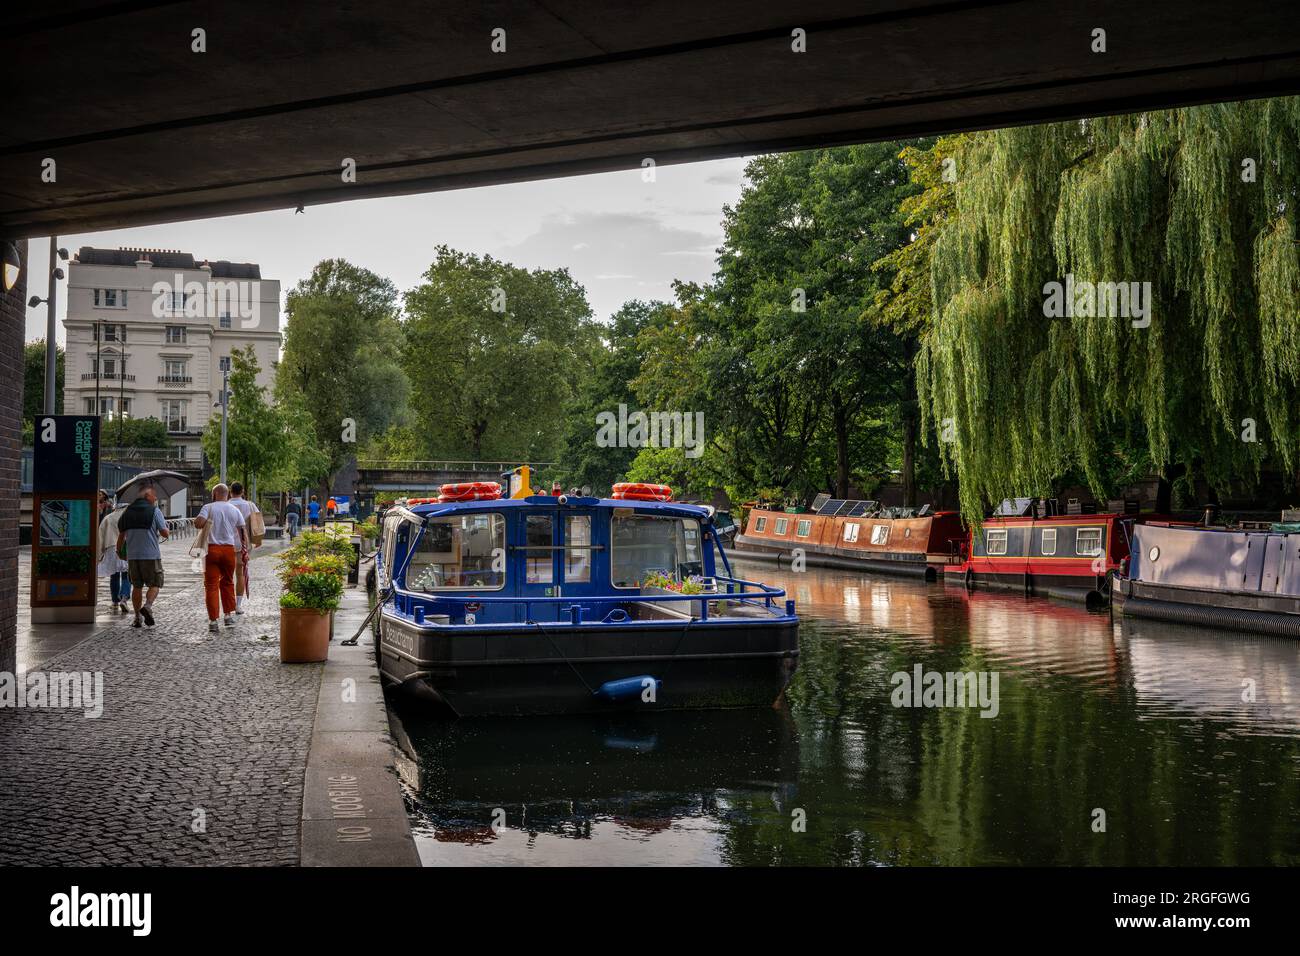 London, UK: Canal boats on the Paddington branch of the Grand Union Canal between Little Venice and Paddington Basin. Stock Photo